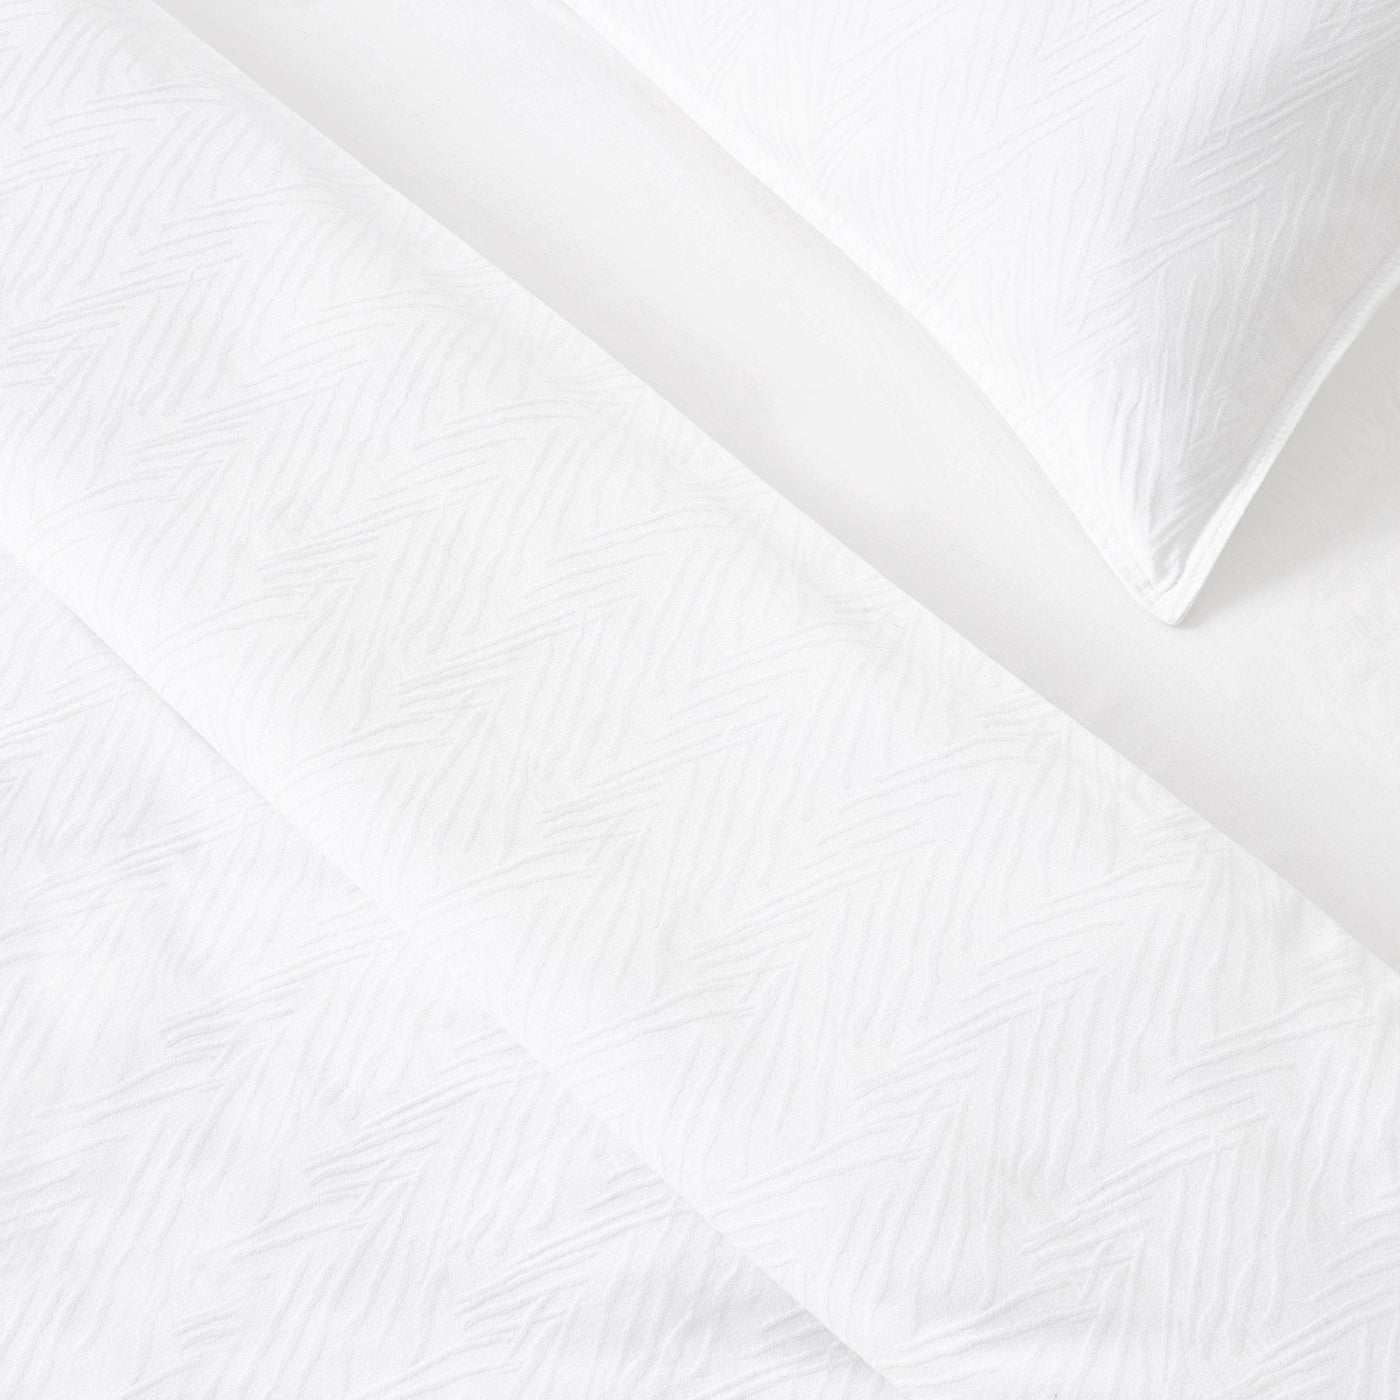 Freddie 100% Turkish Cotton Jacquard 300 TC Duvet Cover Set + Fitted Sheet, White, Double Size 6